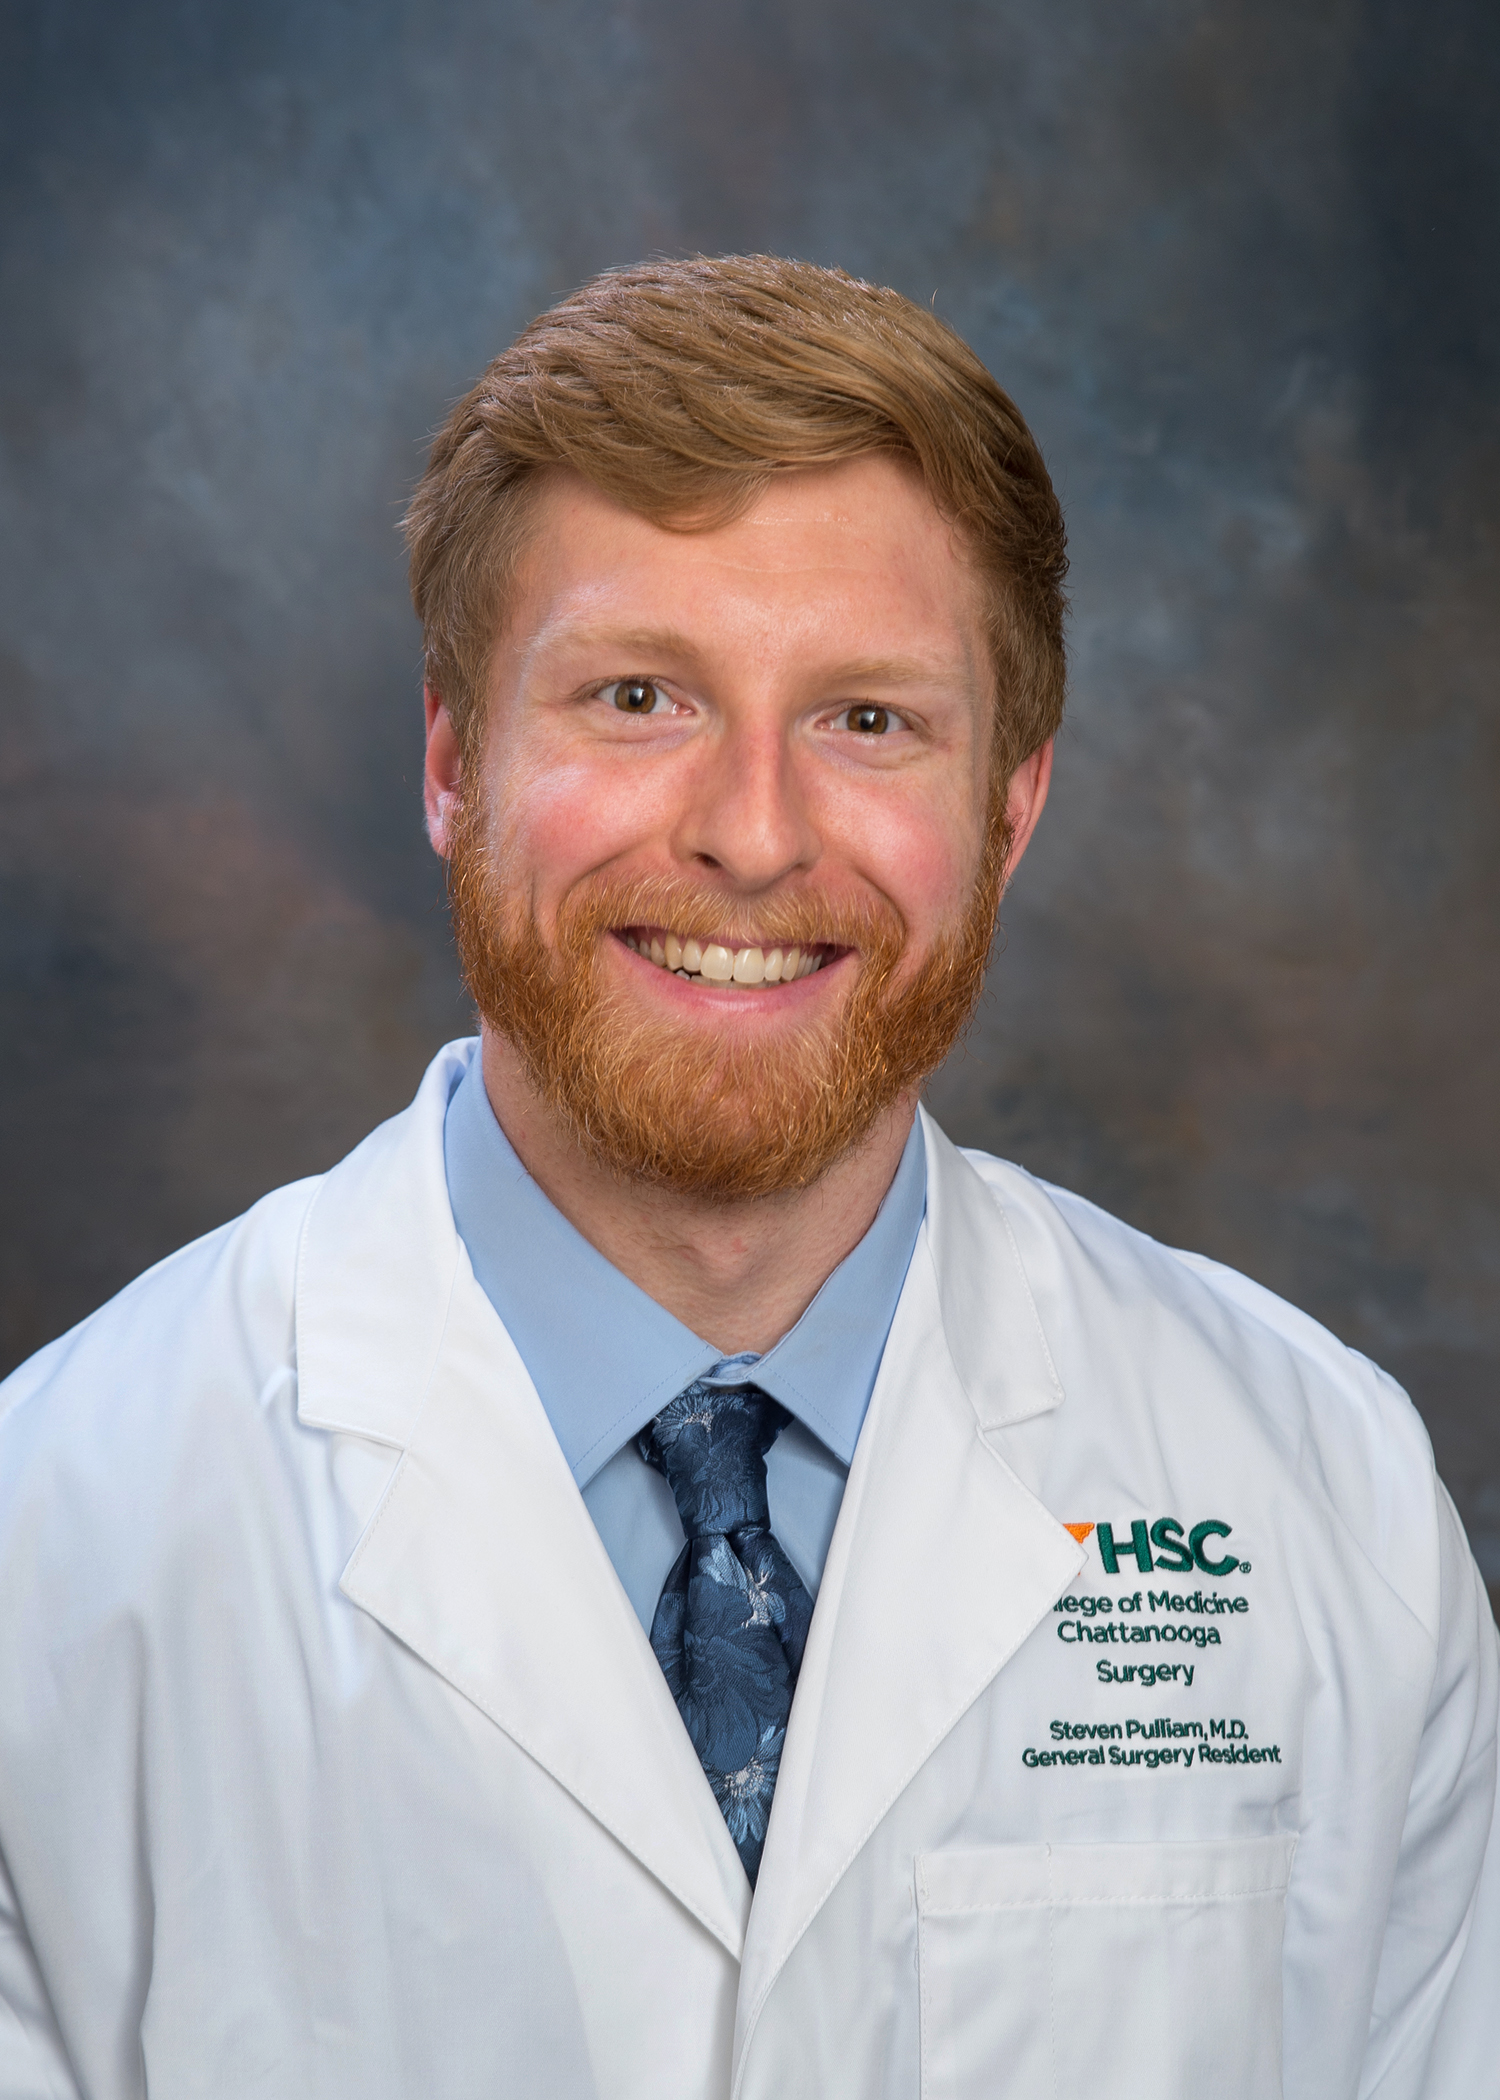 Steven Pulliam, MD, PGY-1 Preliminary Surgery Resident